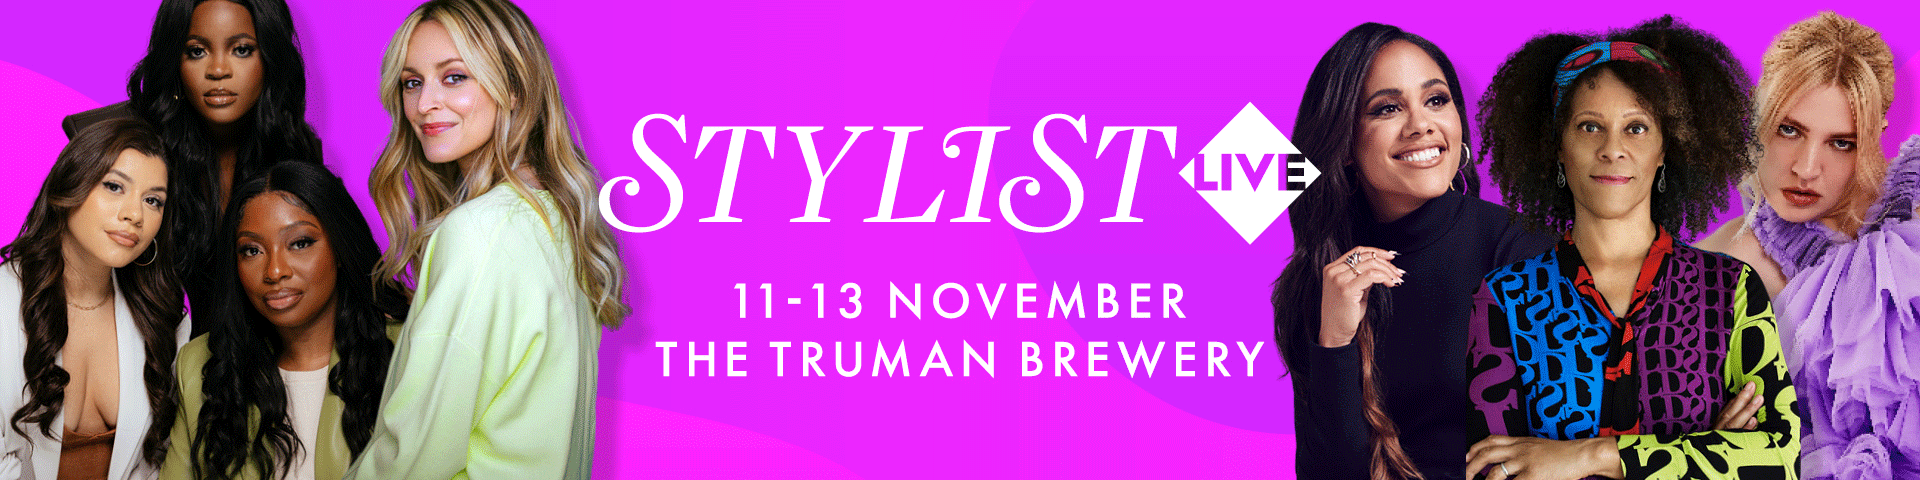 Stylist Live, 11th -13th November, The Truman Brewery